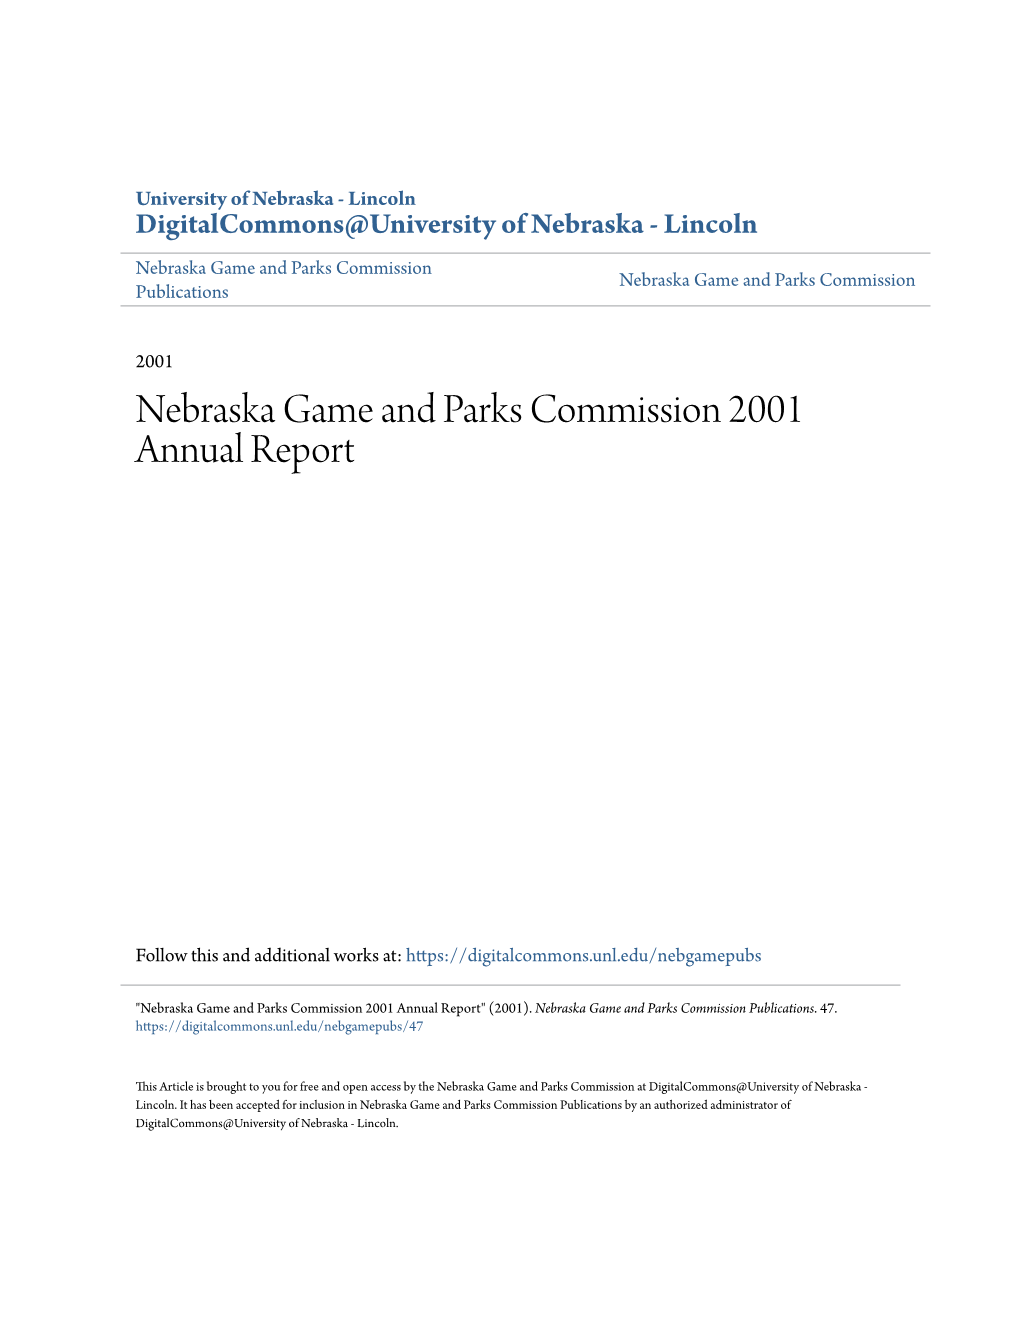 Nebraska Game and Parks Commission 2001 Annual Report